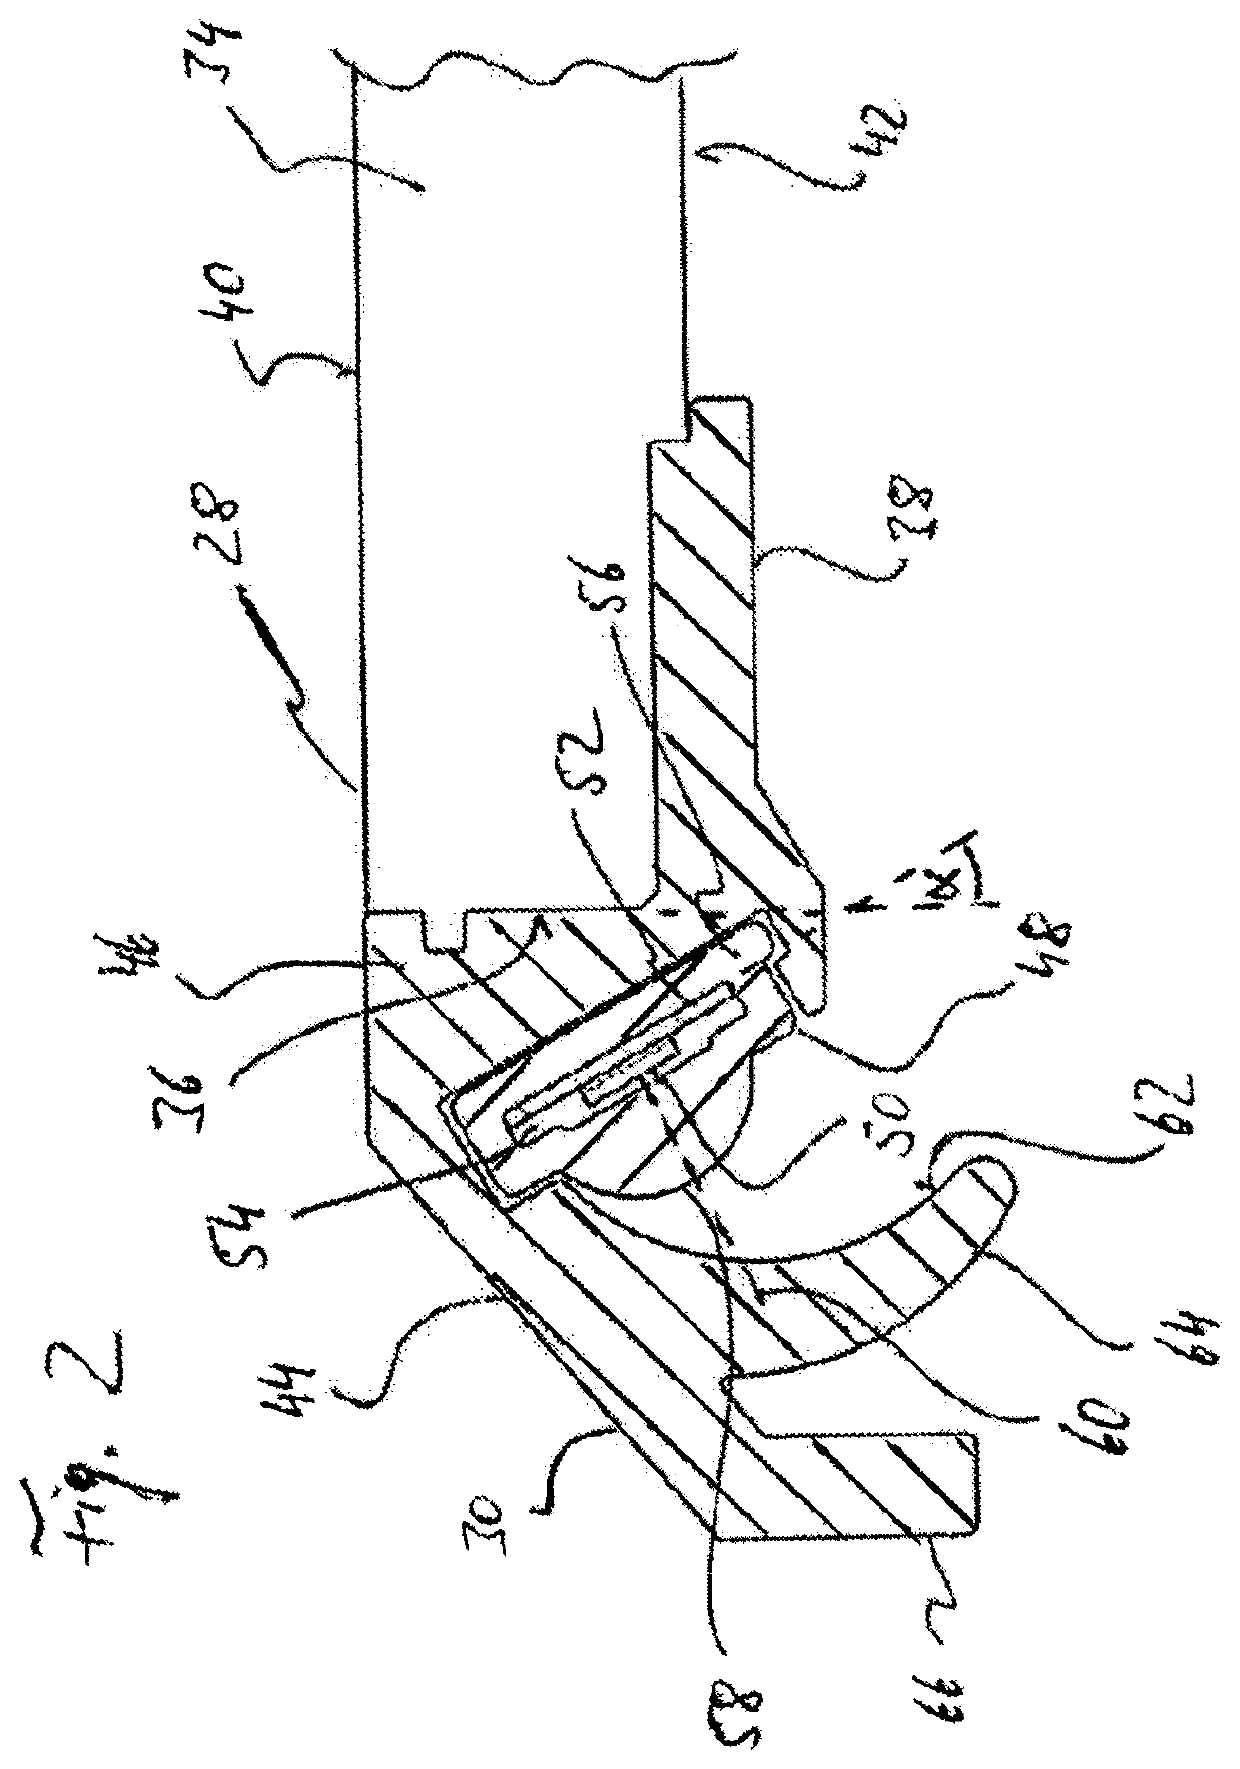 Shelf with lighting function for a domestic cooling device